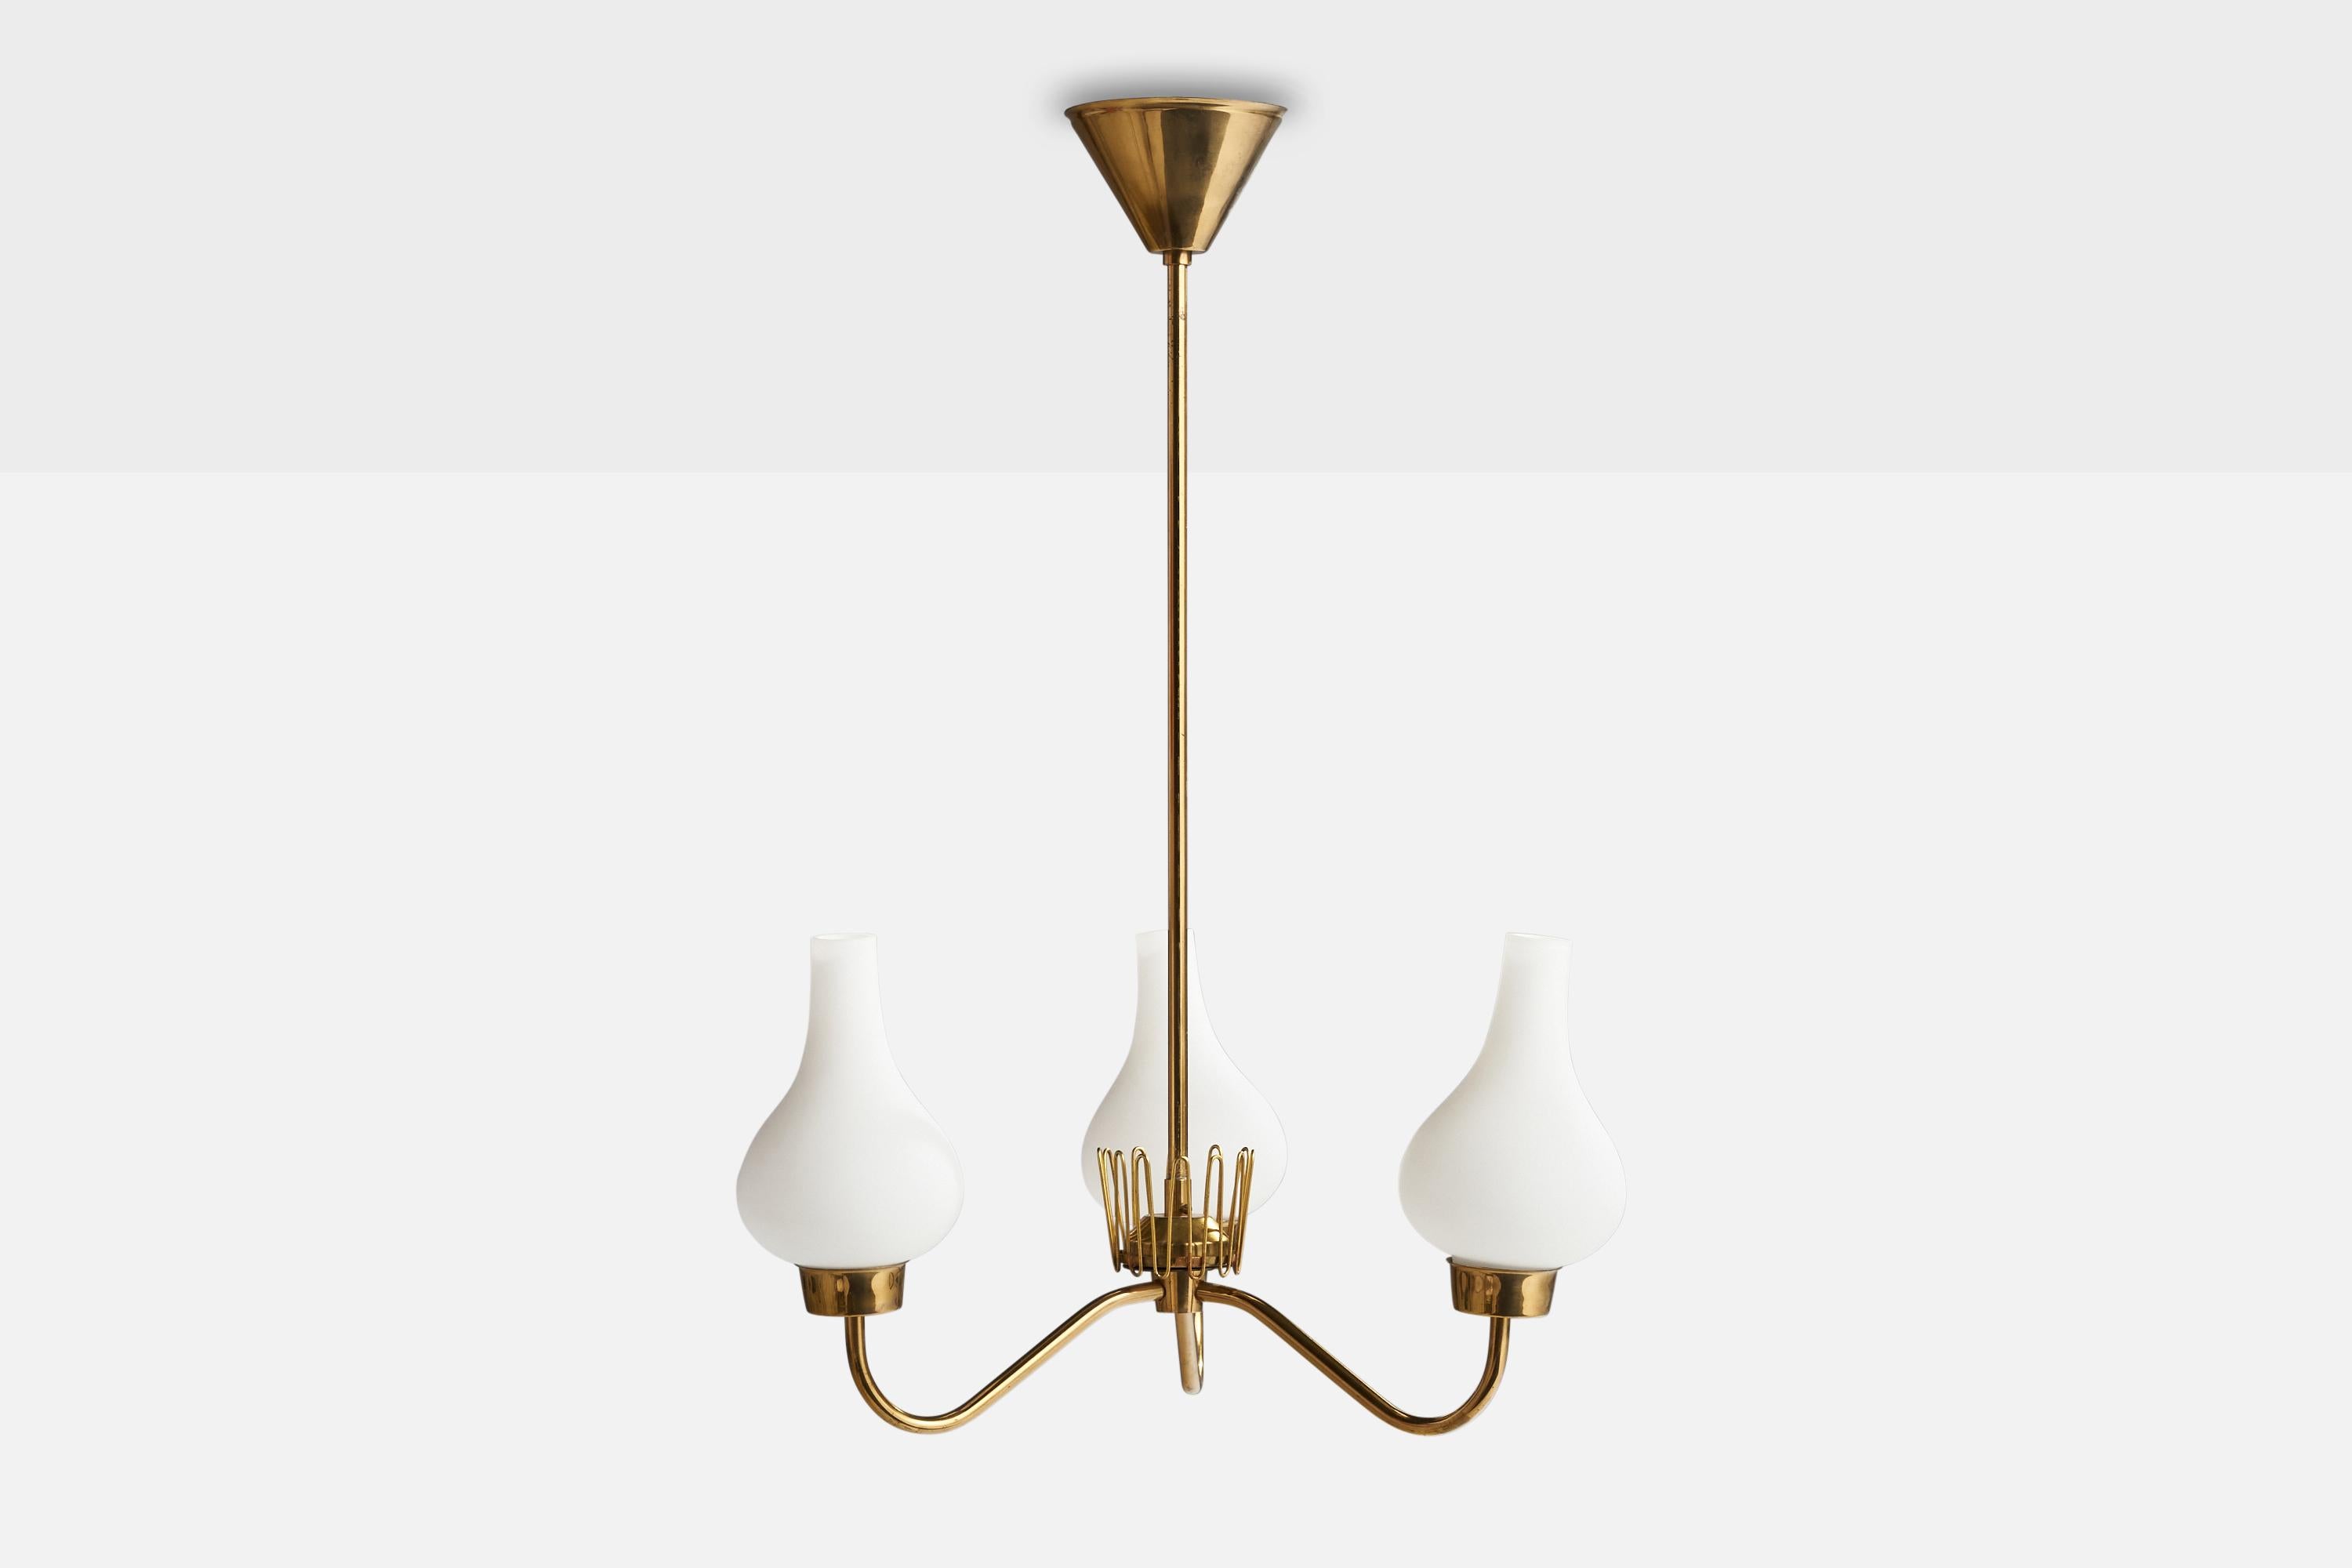 A brass and opaline glass chandelier designed and produced in Sweden, 1930s.

Dimensions of canopy (inches): 3” H x 4.25” Diameter
Socket takes standard E-14 bulbs. 3 sockets.There is no maximum wattage stated on the fixture. All lighting will be